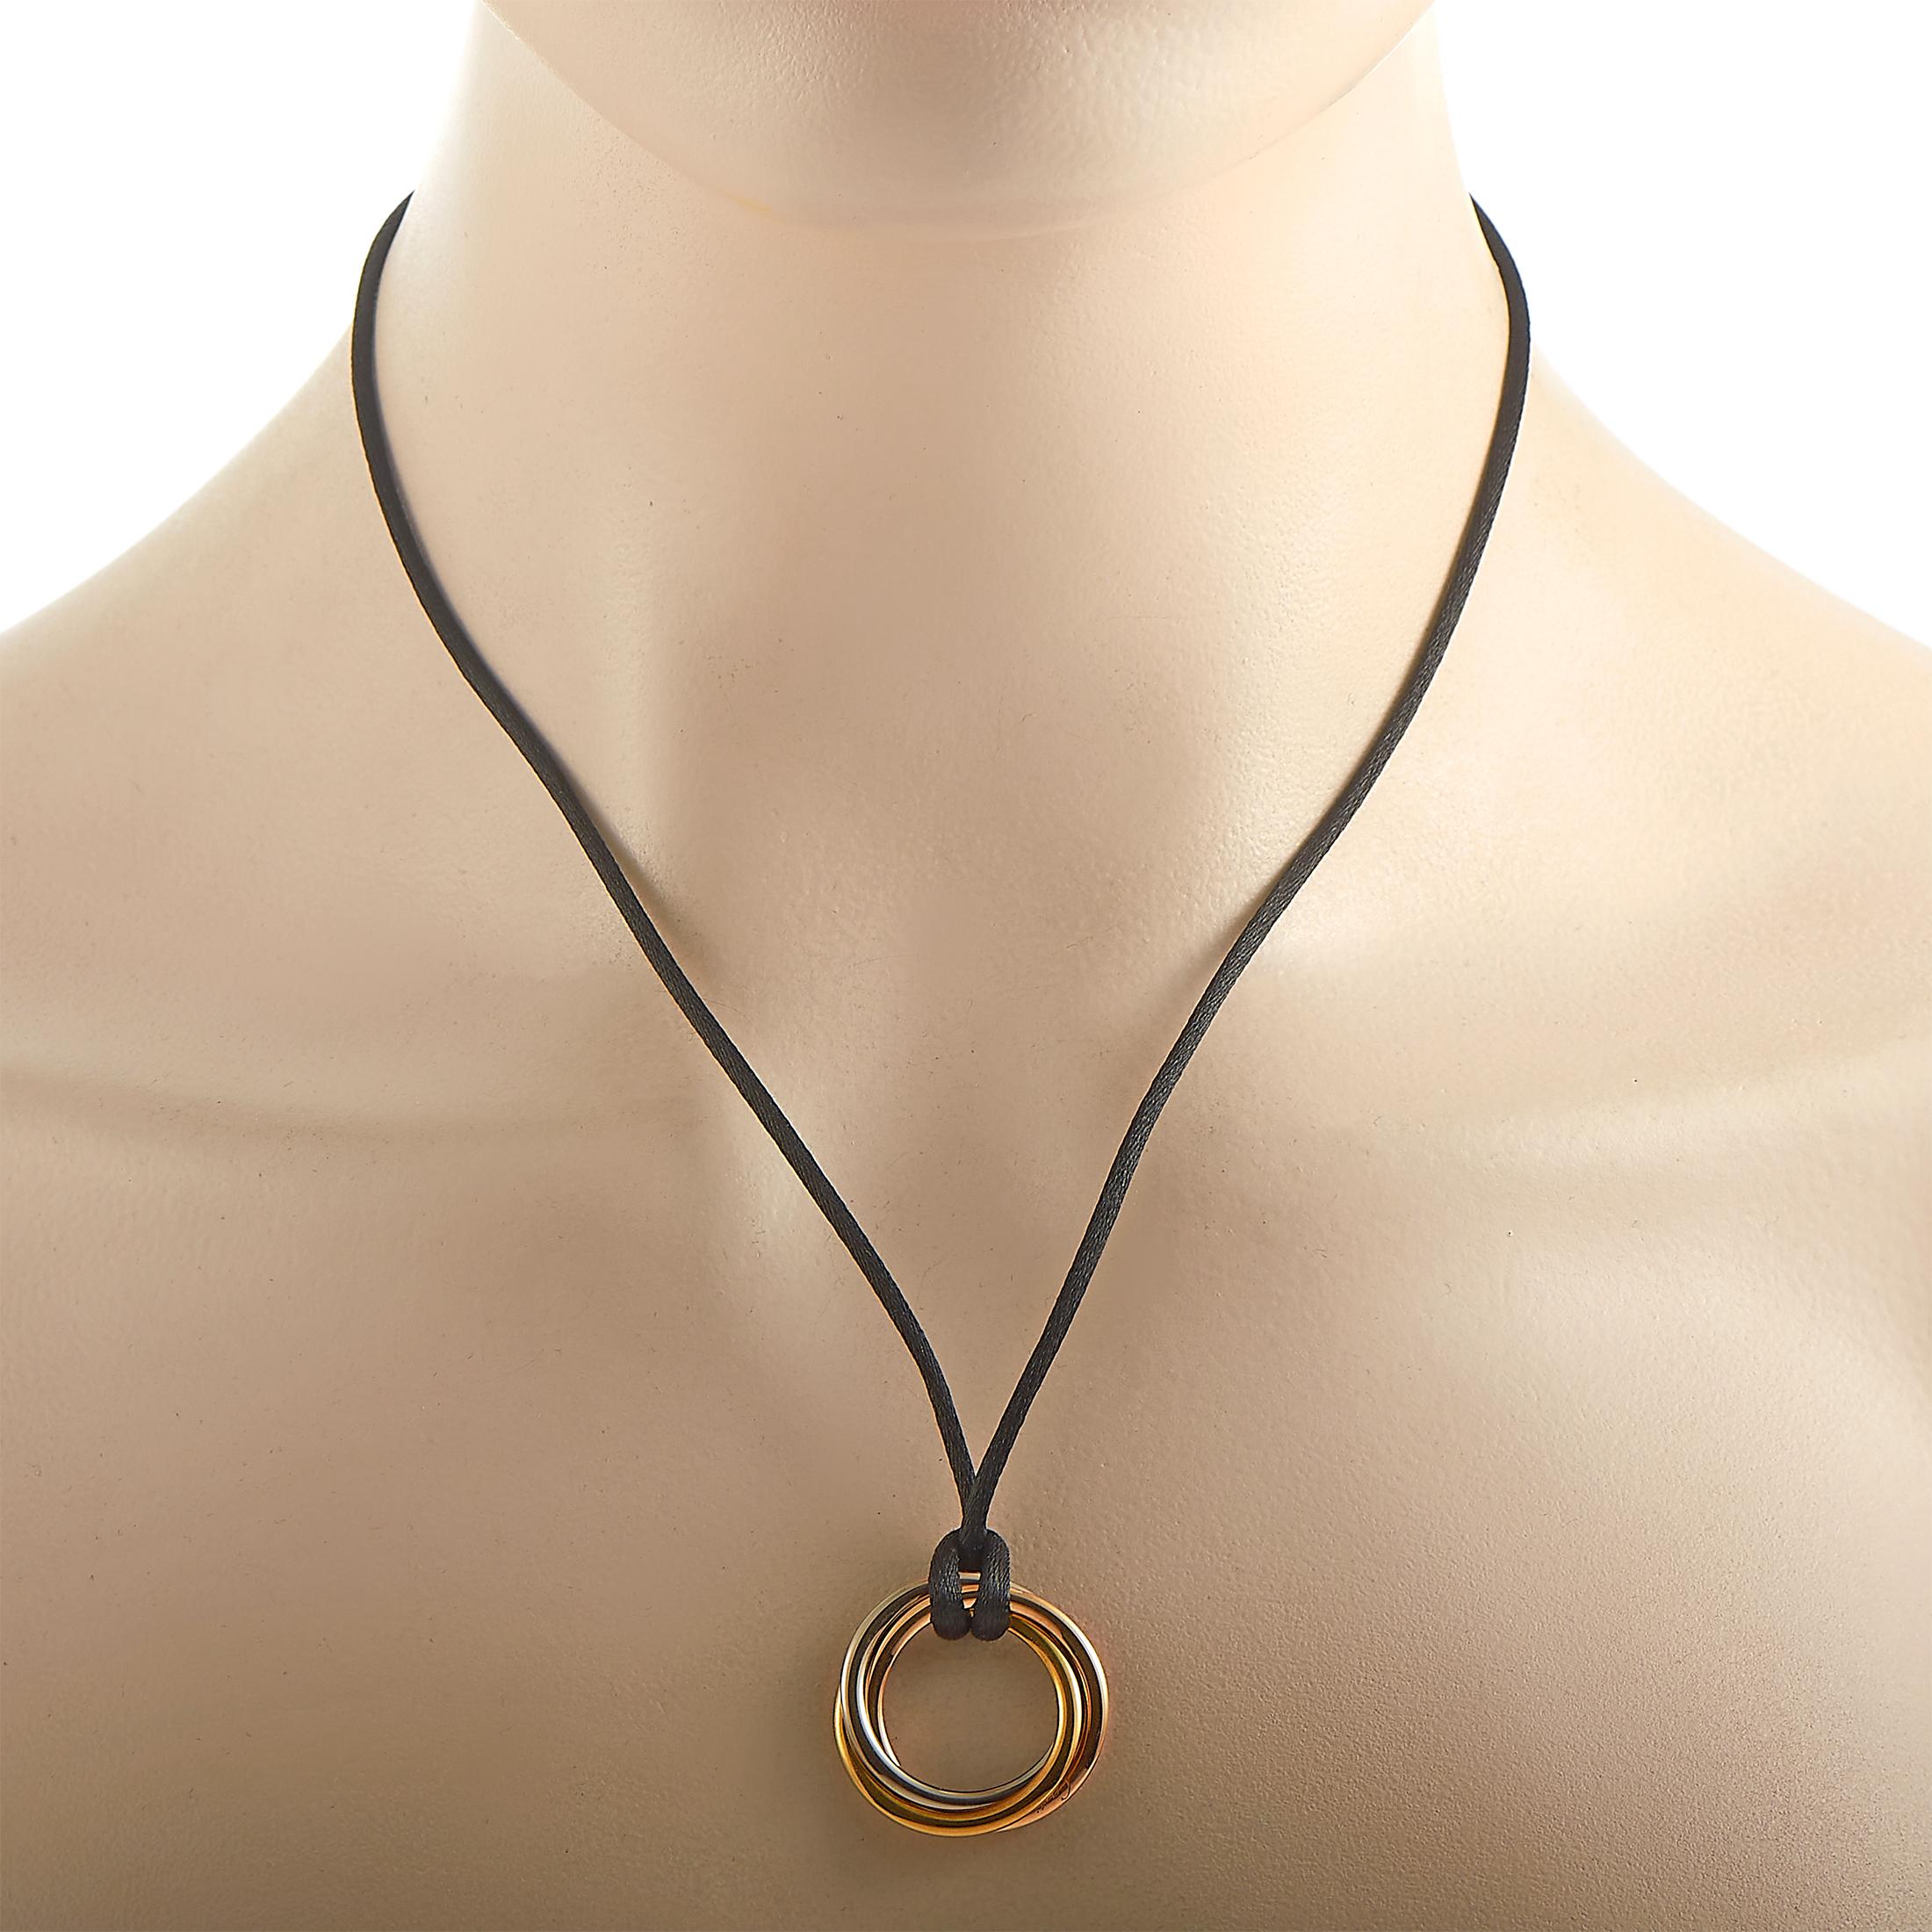 The Cartier “Trinity” necklace is presented with a 22” black cord onto which a 1” by 1” pendant is attached, made out of 18K yellow, white and rose gold.
Retail Price: $2220

This jewelry piece is offered in estate condition and includes the